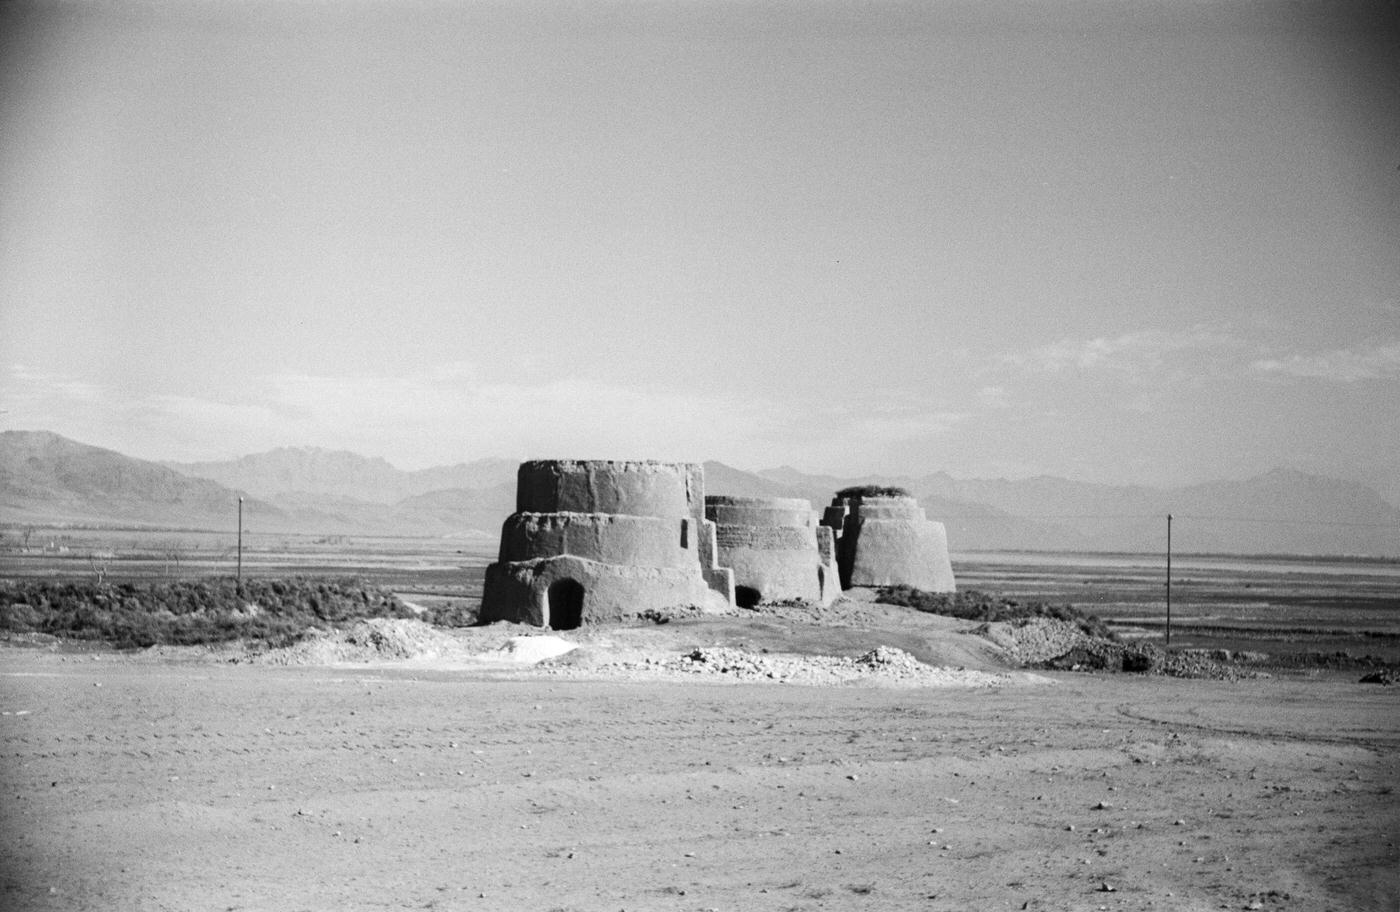 A construction site on battue land south of the Kaboul route, 1950s